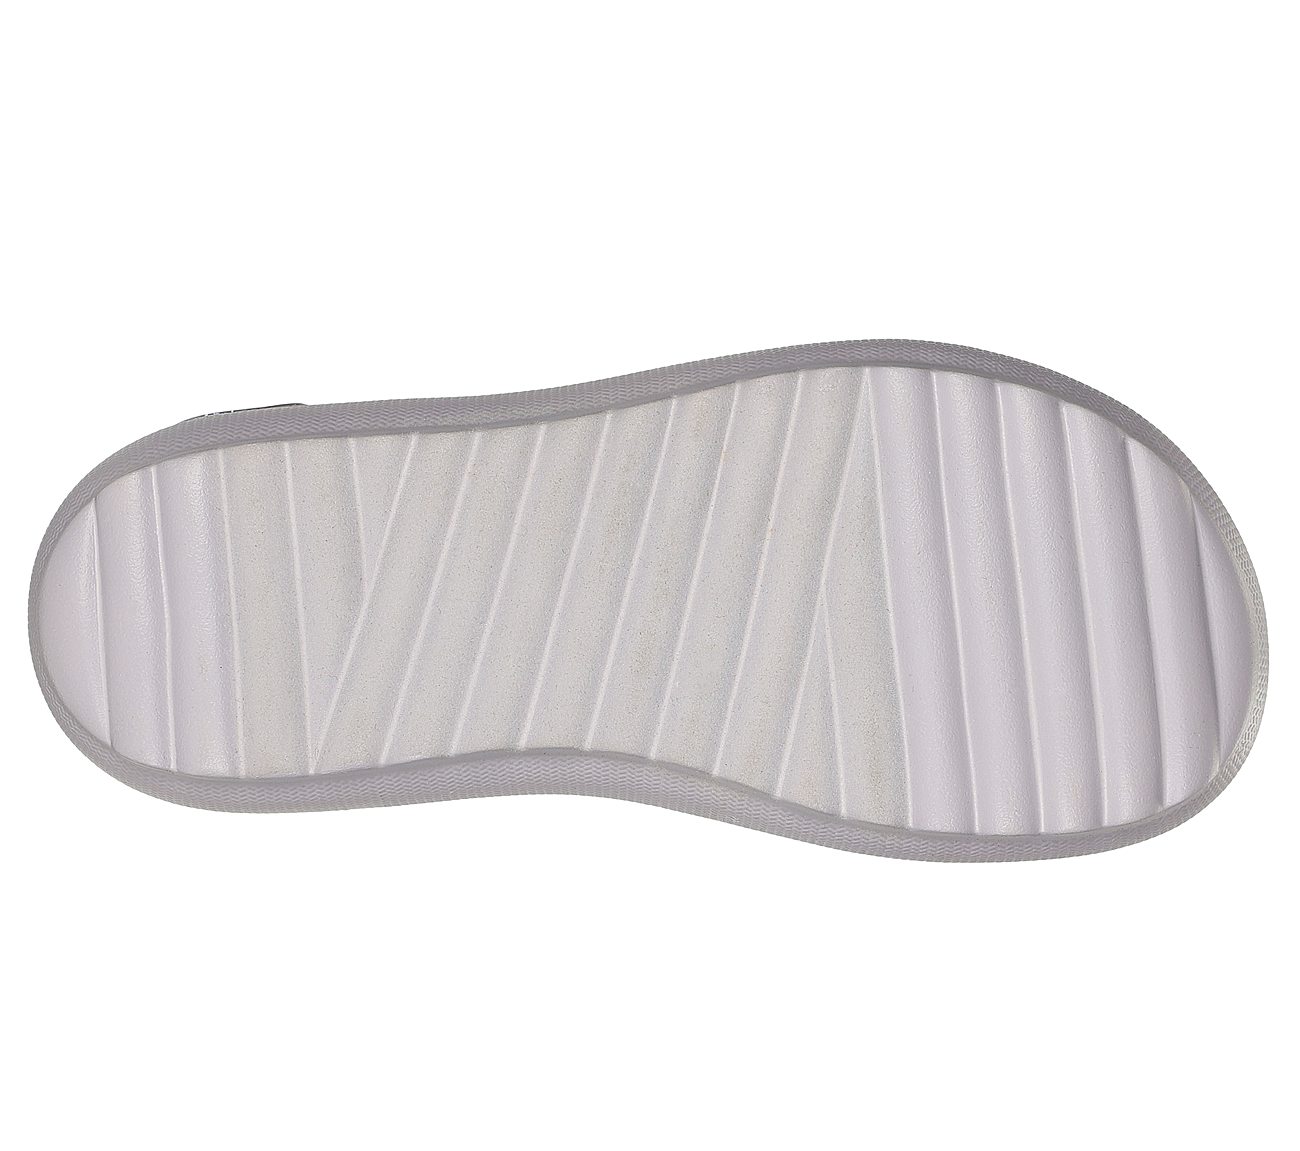 ARCH FIT CLOUD, LILAC Footwear Bottom View